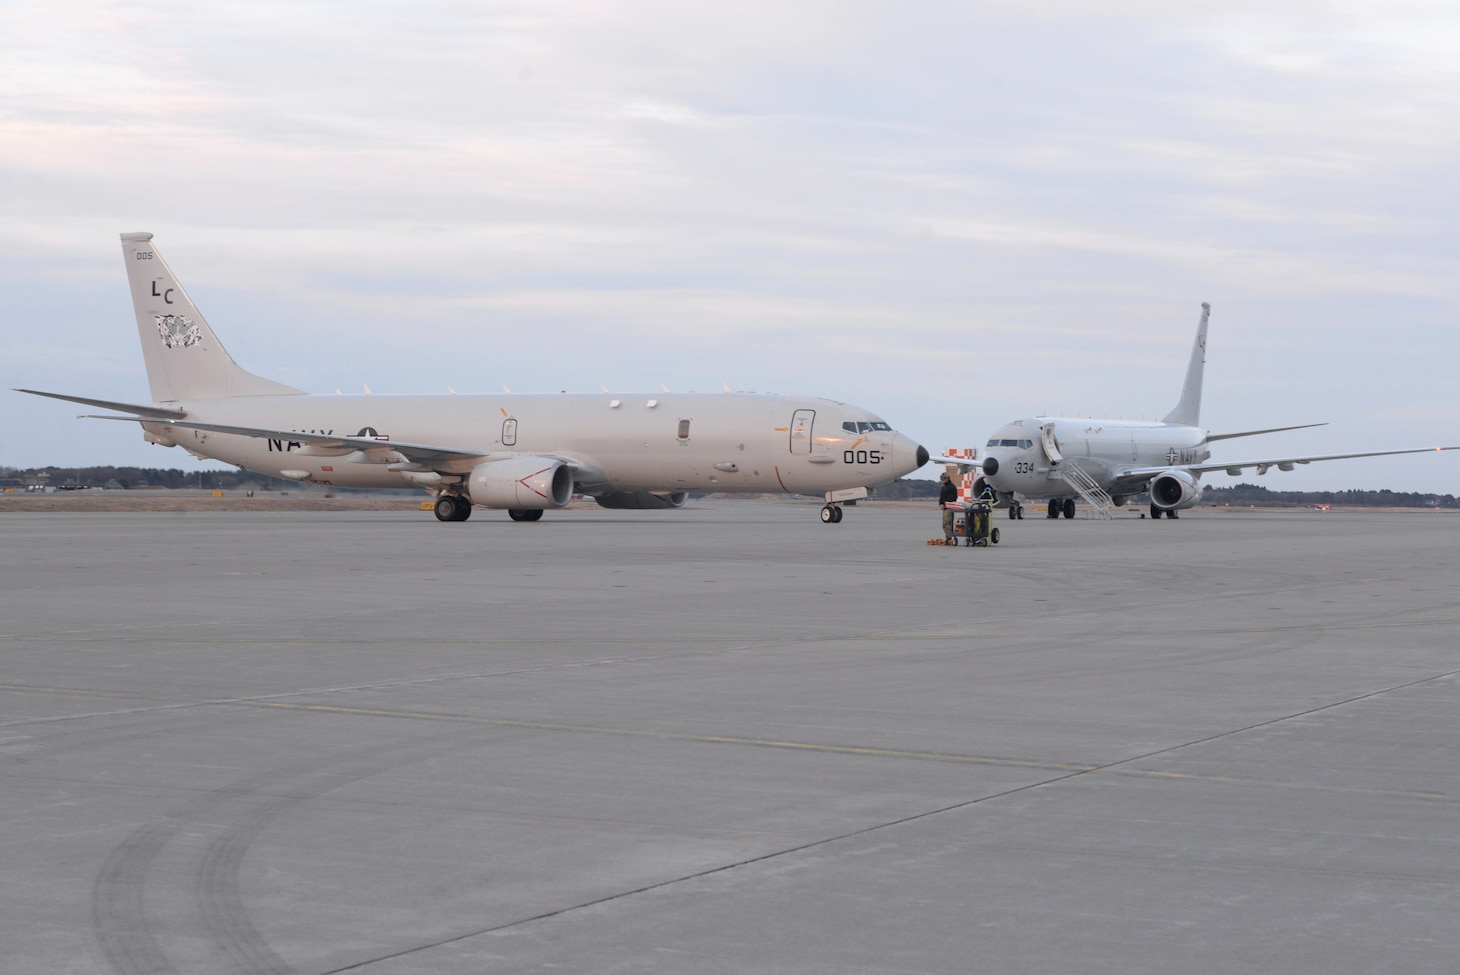 A P-8A Poseidon aircraft assigned to the “Fighting Tigers” of Patrol Squadron (VP) 8, taxis on the flight line of Misawa Air Base after a Search and Rescue mission for a missing Japanese F-35 fighter jet Pilot. VP-8 is deployed to the U.S. 7th Fleet (C7F) area of operations conducting maritime patrol and reconnaissance operations in support of Commander, Task Force 72, C7F, and U.S. Pacific Command objectives throughout the Indo-Asia Pacific region.